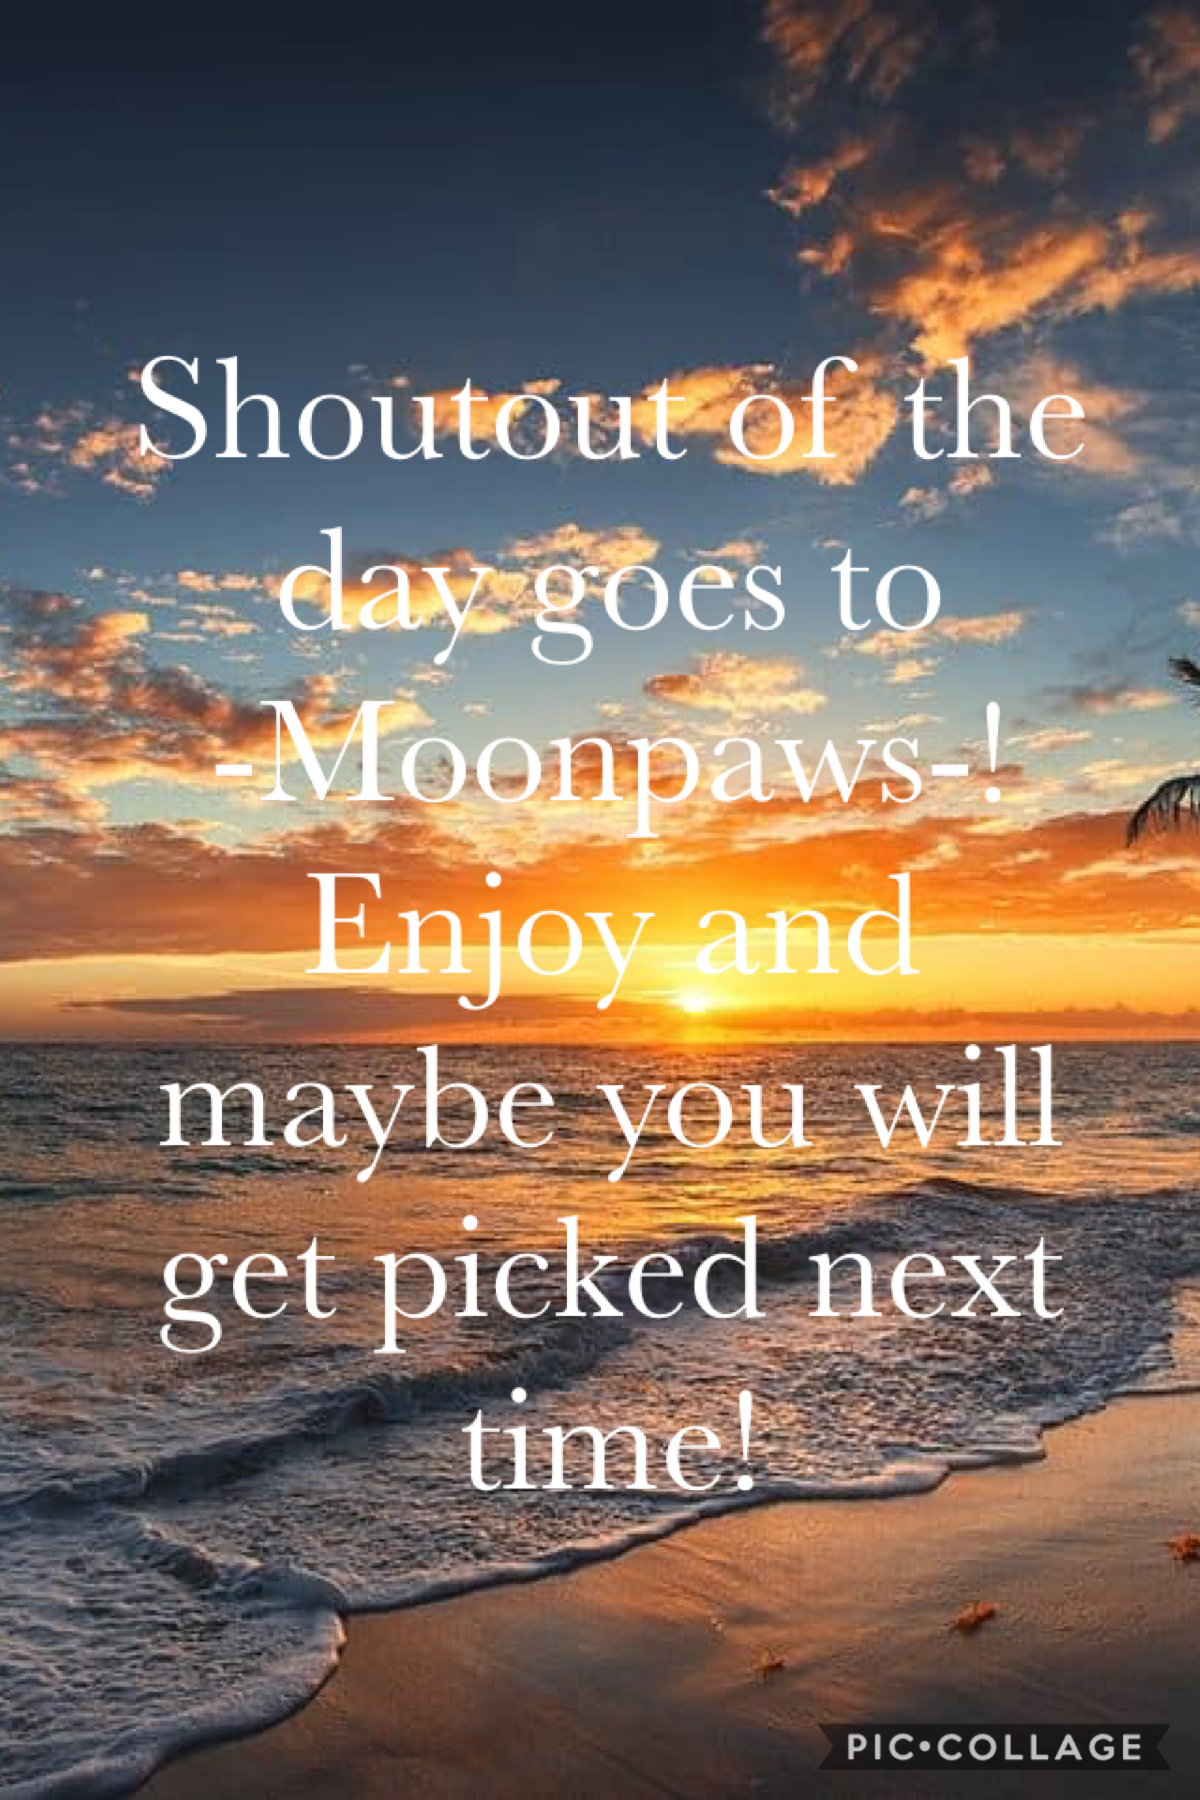 Shoutout goes to @-MoonPaws- have fun and stay safe everyone x ❤️❤️ <3